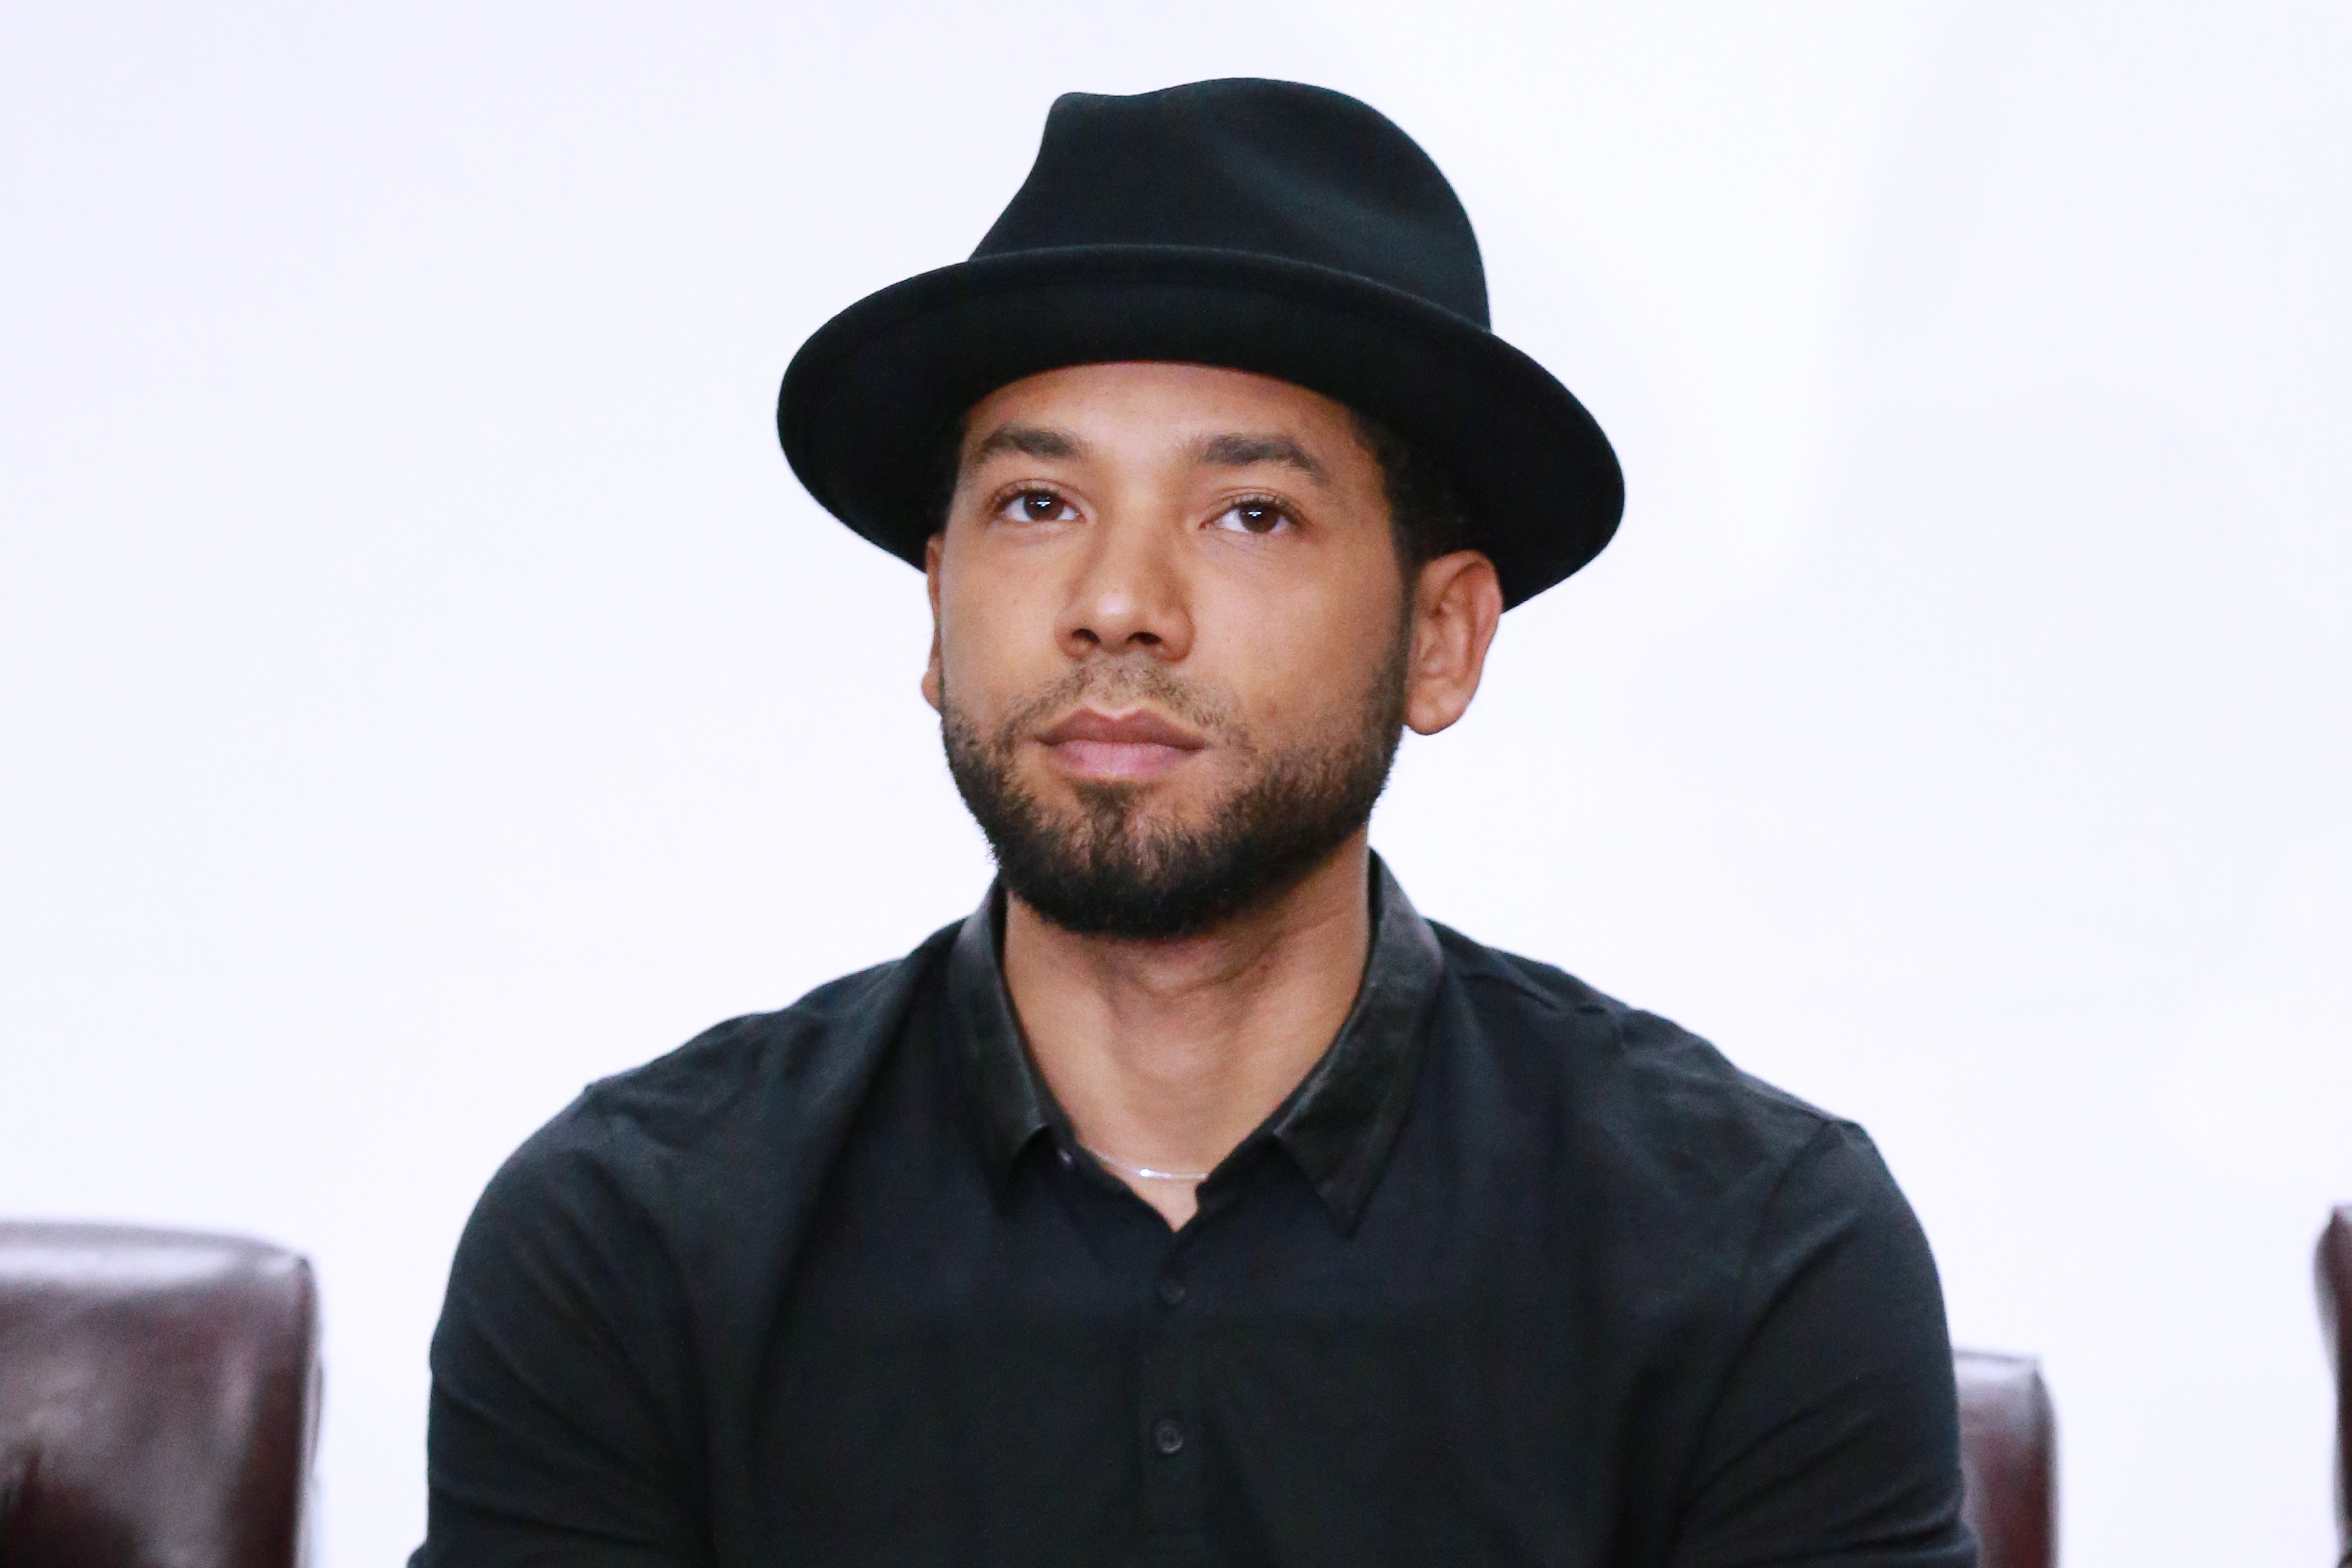 Jussie Smollett at a film screening at Compton High School in October 2017. | Photo: Getty Images